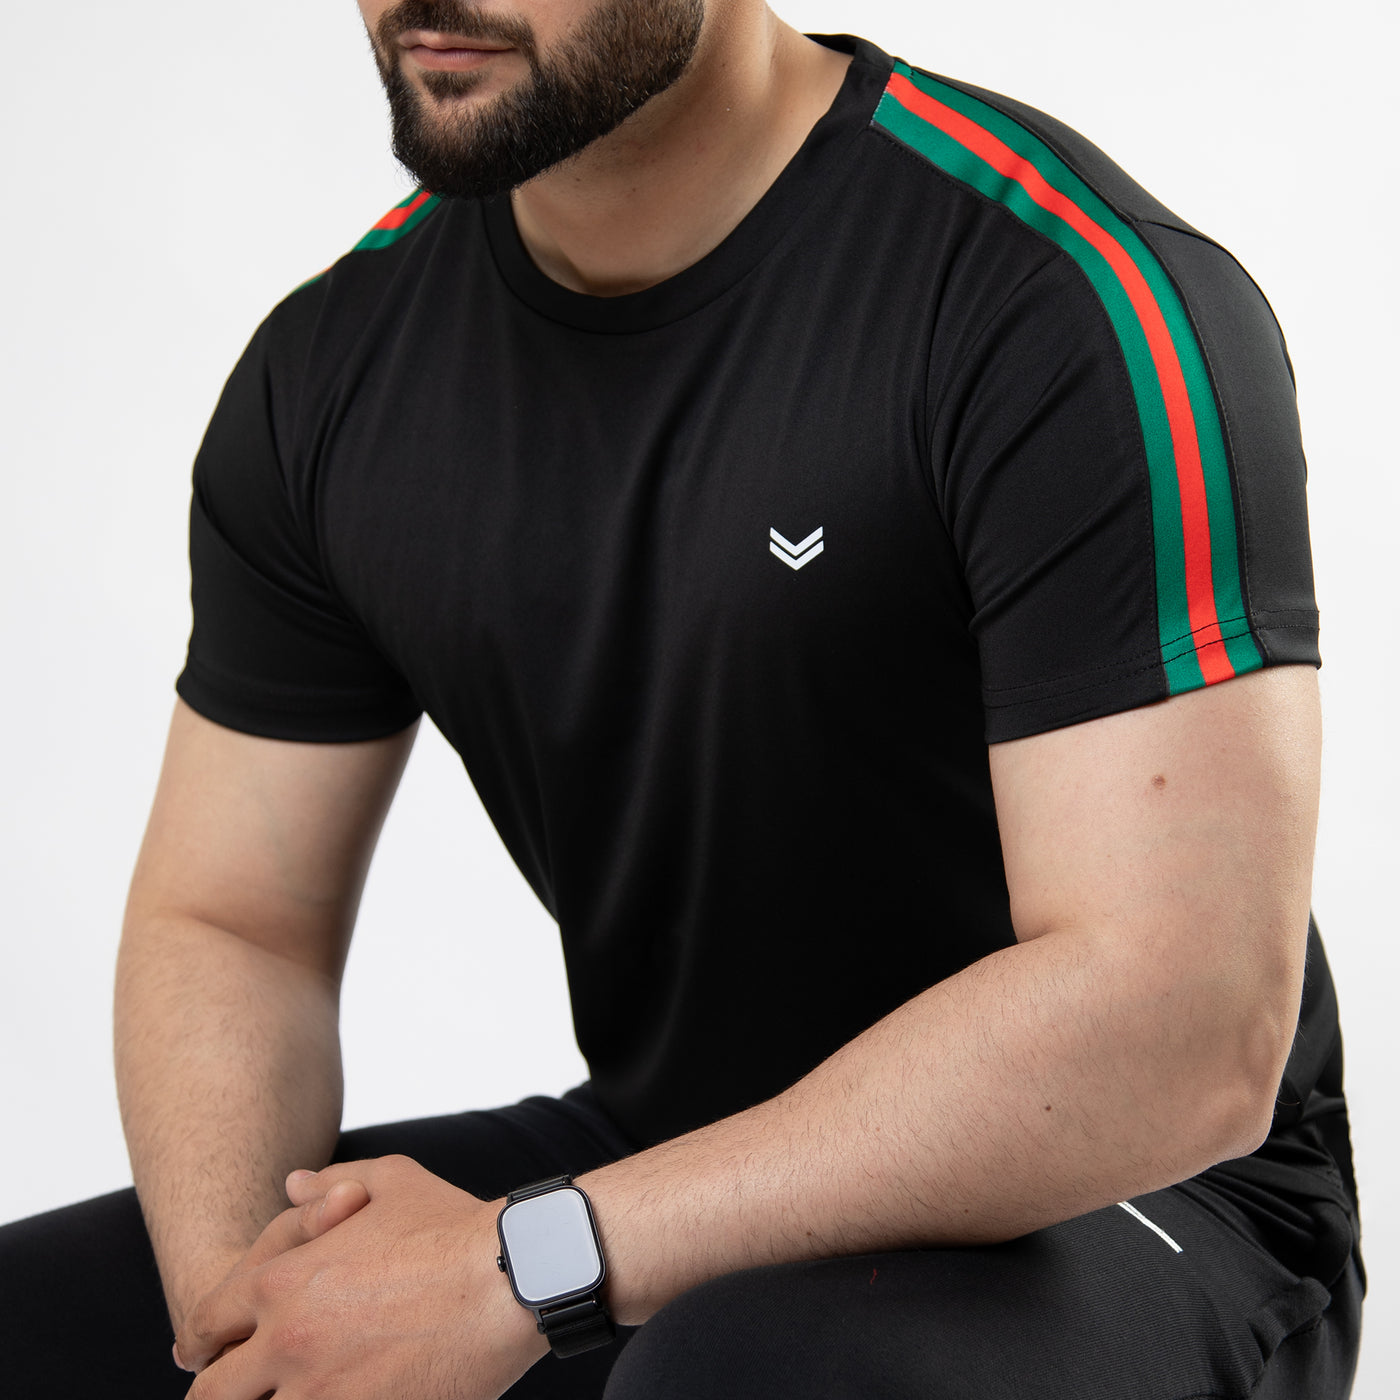 Black Quick Dry T-Shirt with Green & Red Panels on Sleeves